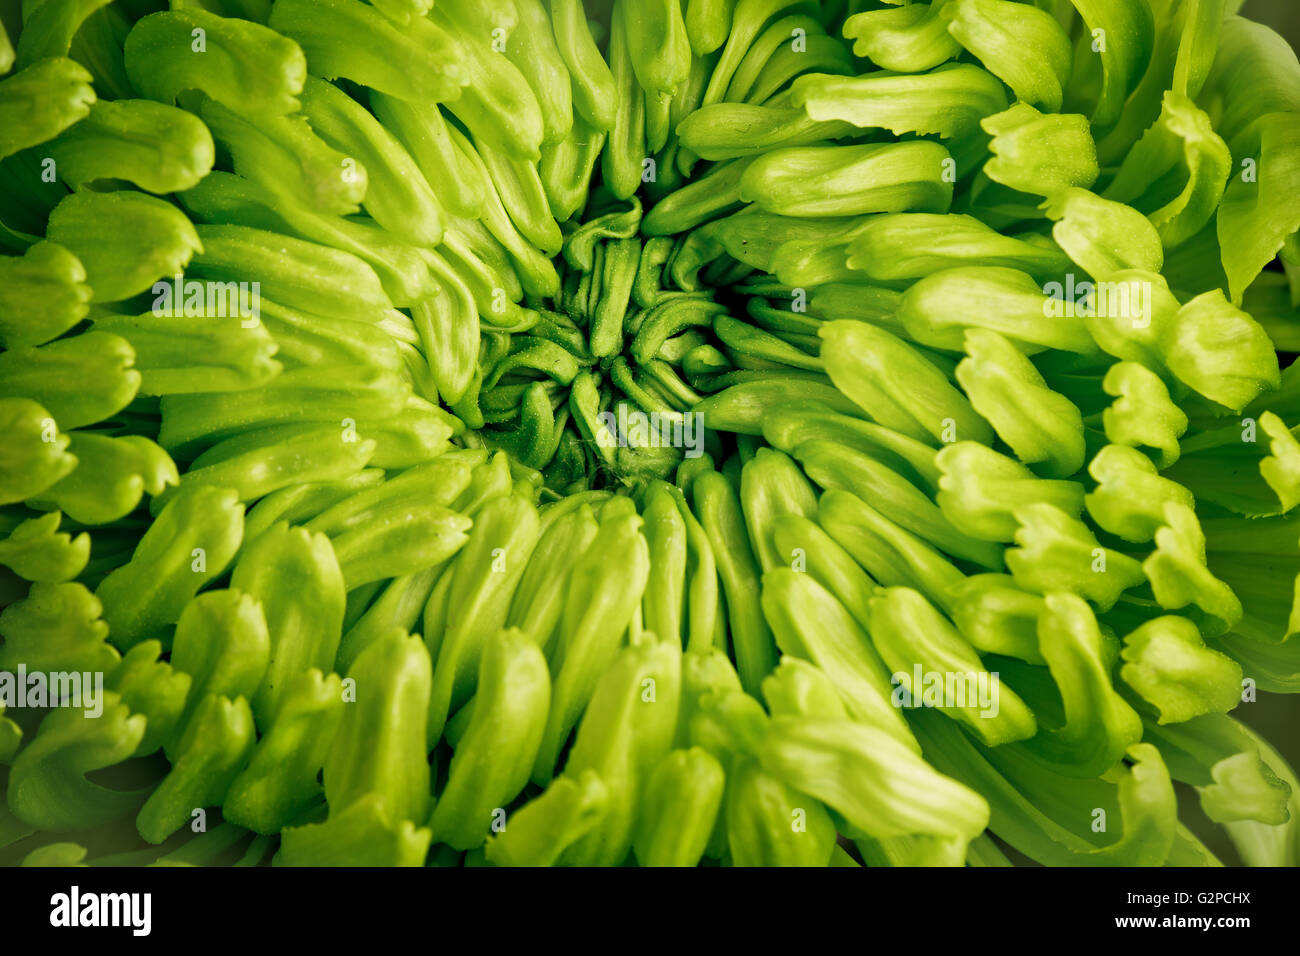 Close up of center of green flower before blossoming Stock Photo